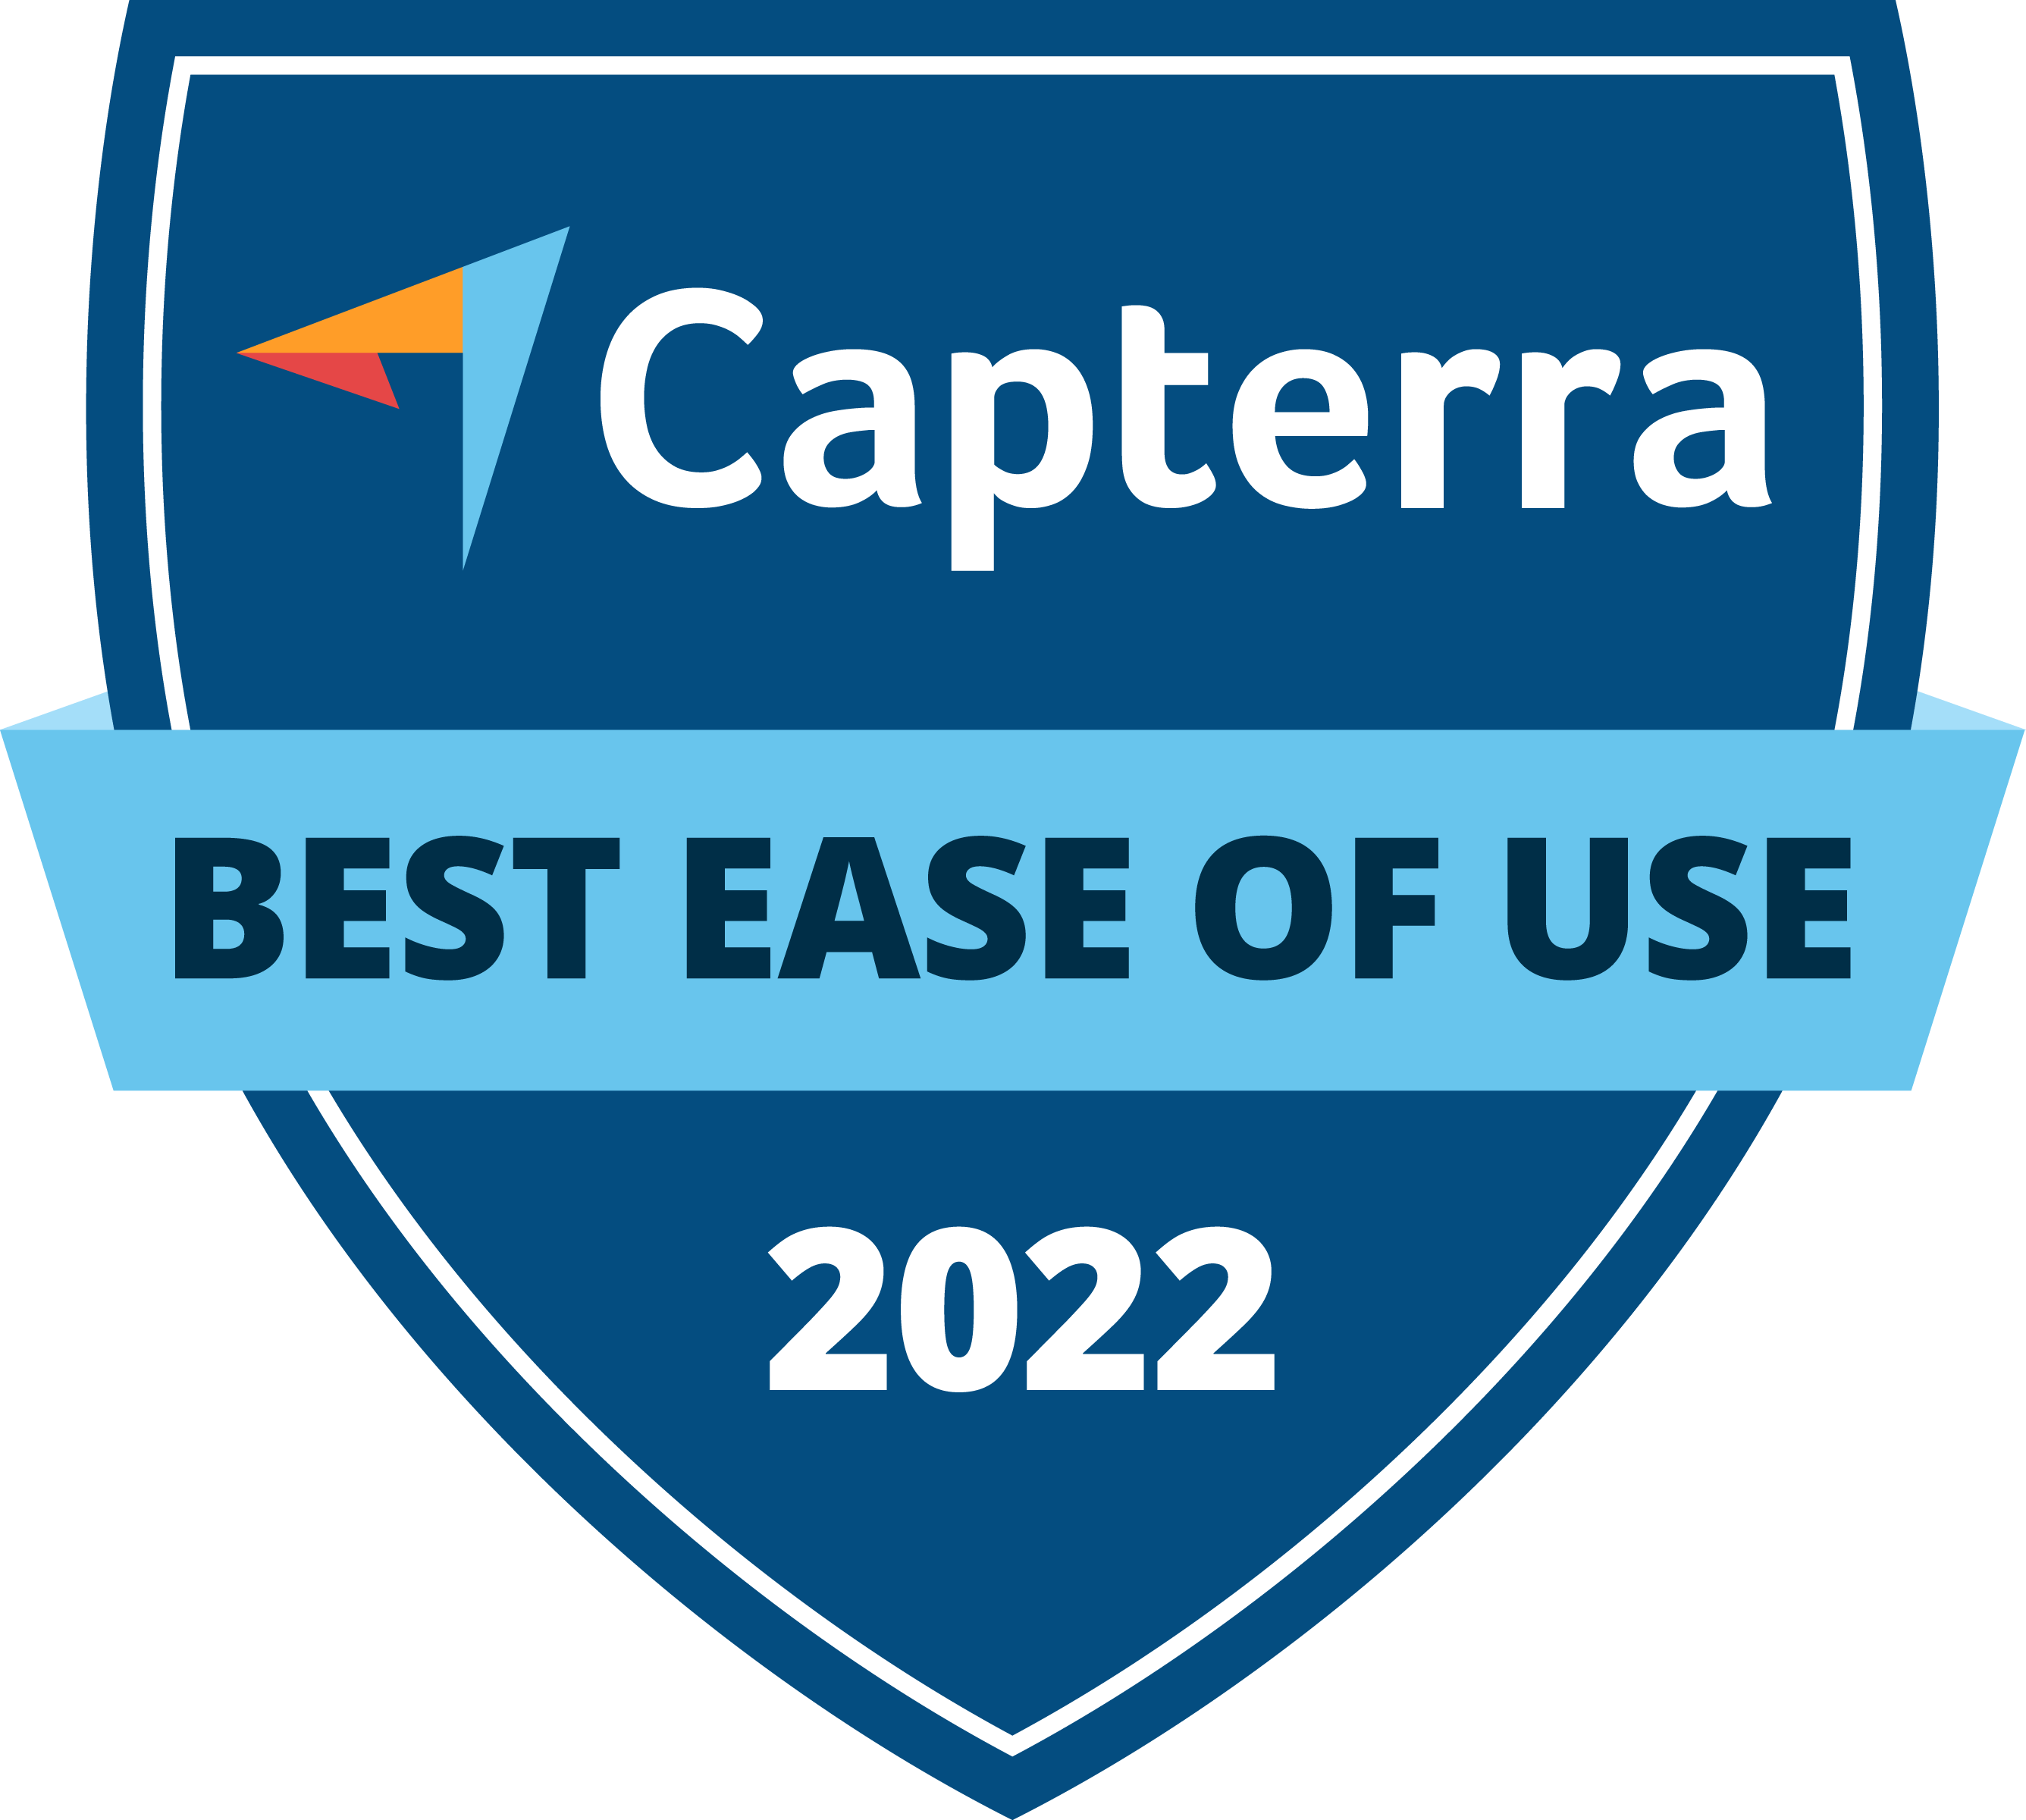 Capterra Best Ease of Use